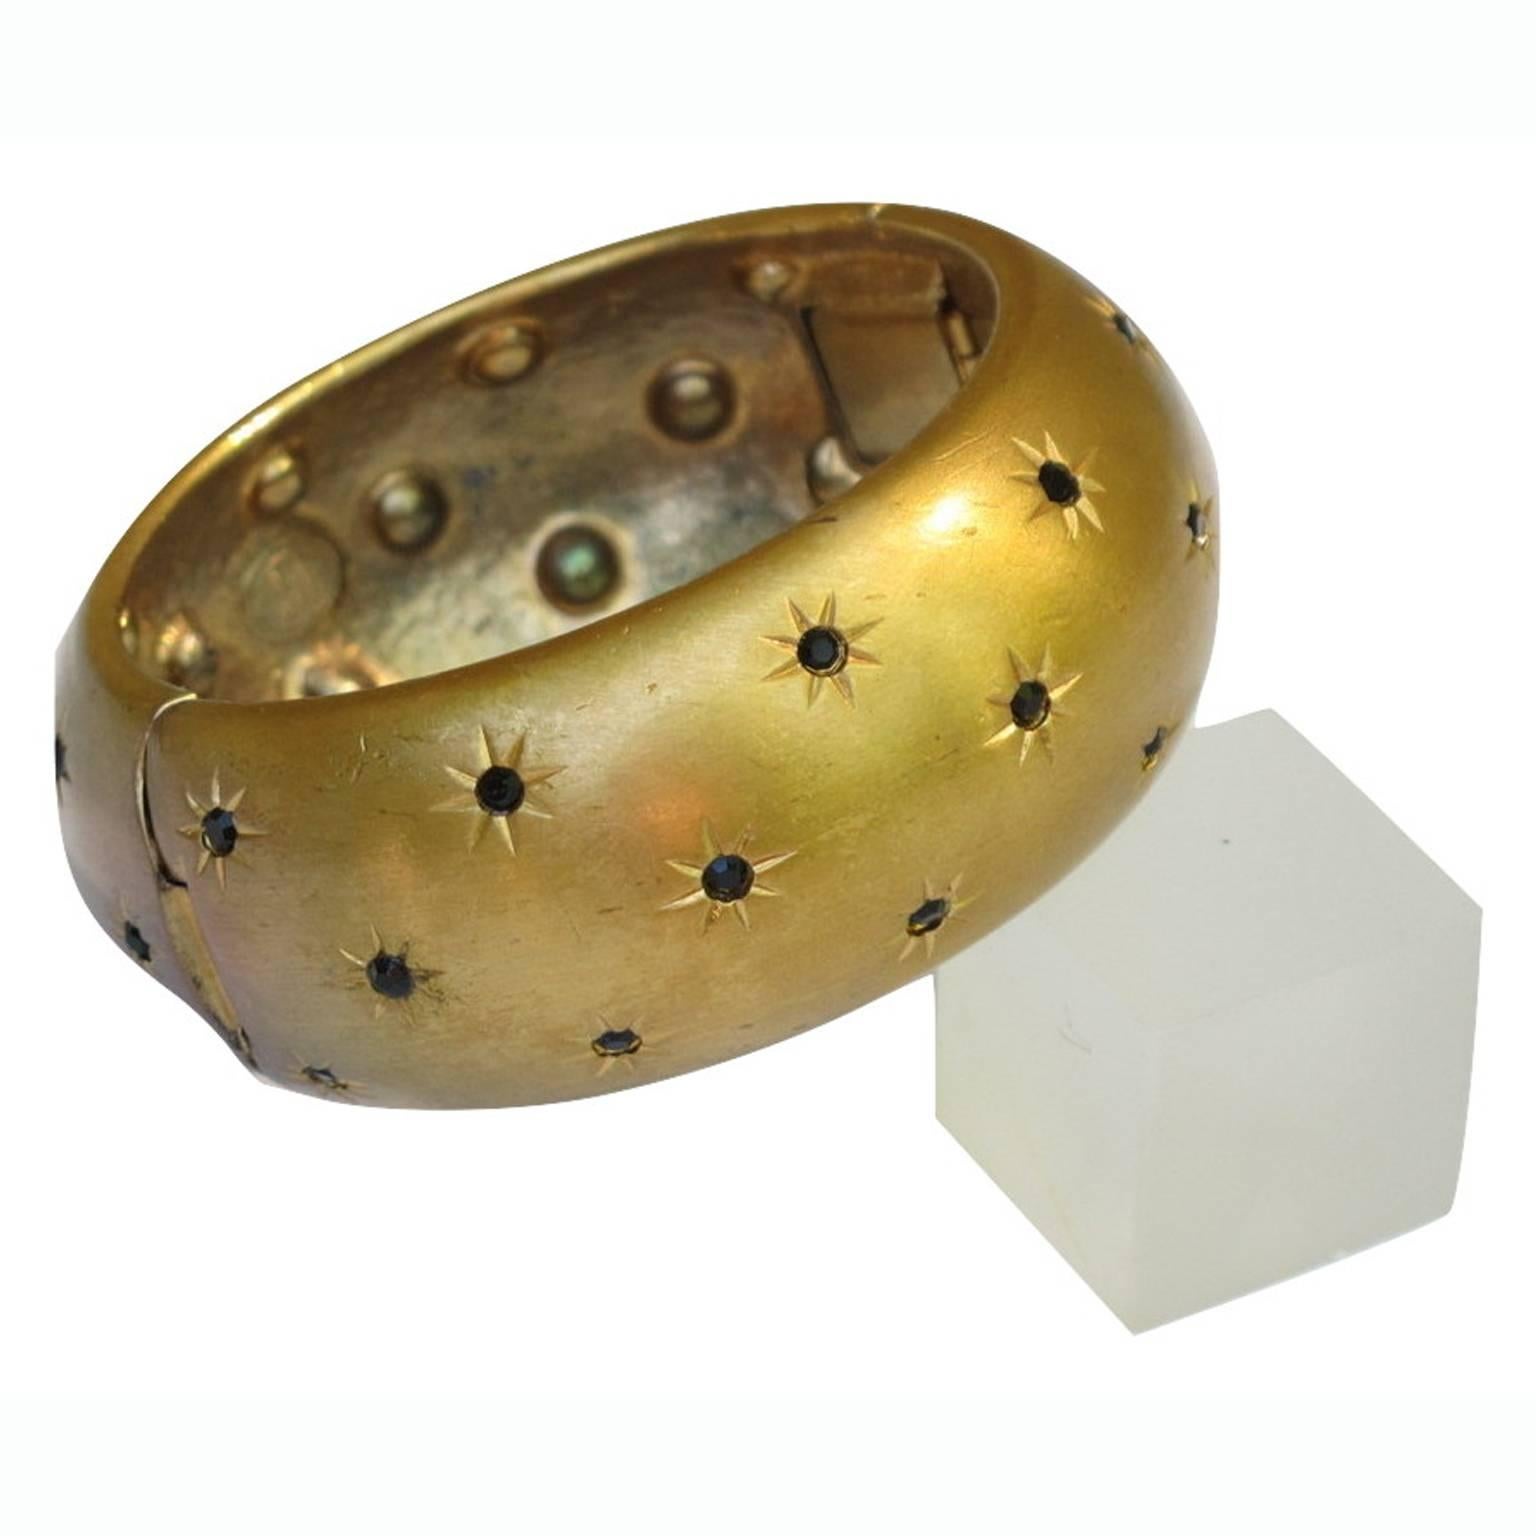 CHRISTIAN DIOR Paris Couture signed Clamper Bracelet. Rare 1960s original gilt metal domed shape with brushed finish aspect all covered with tiny carved stars ornate with black rhinestones. Signed in the inside with gilded tag: "Christian Dior